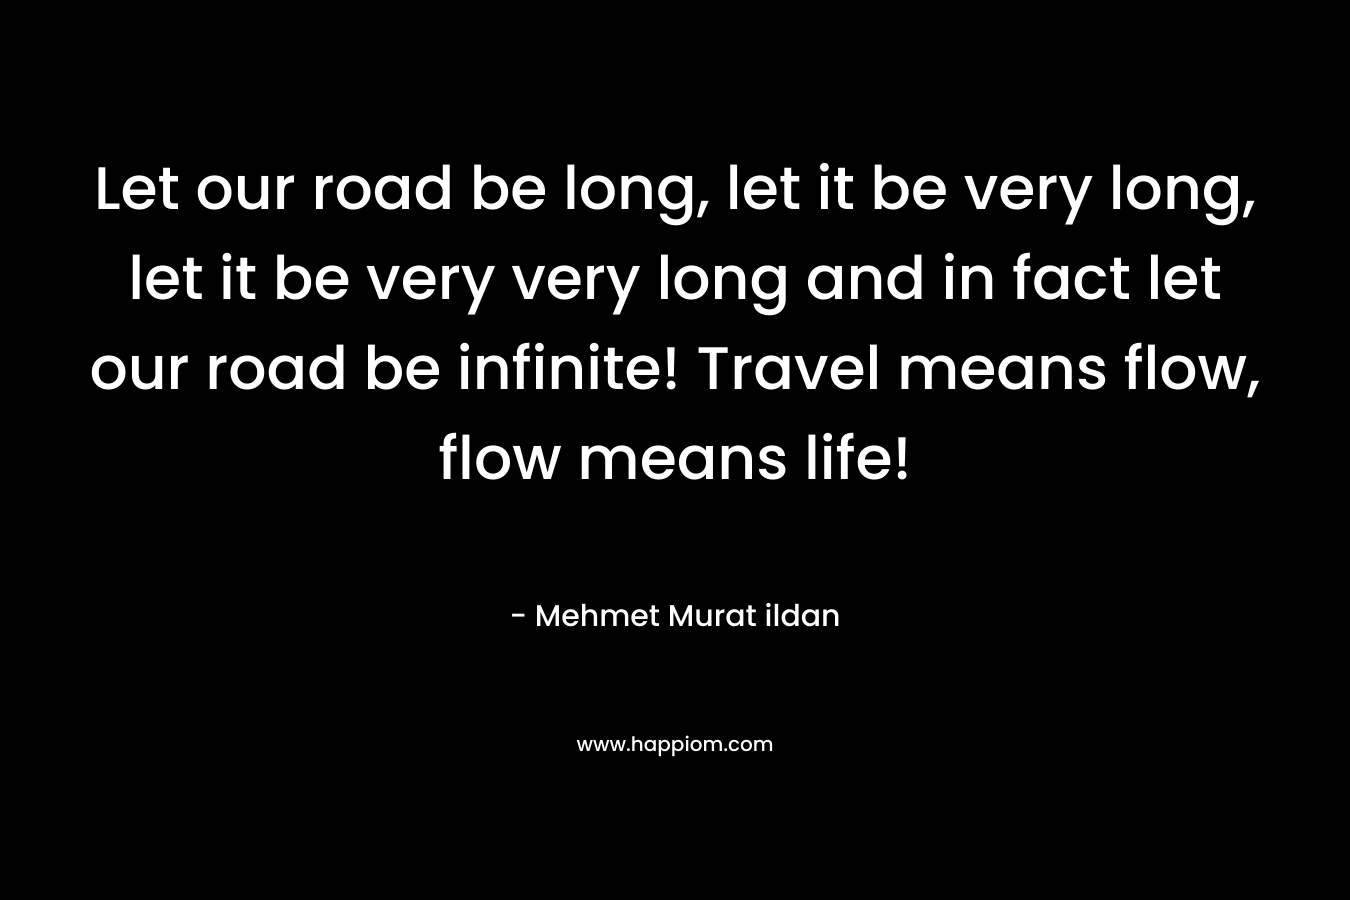 Let our road be long, let it be very long, let it be very very long and in fact let our road be infinite! Travel means flow, flow means life!